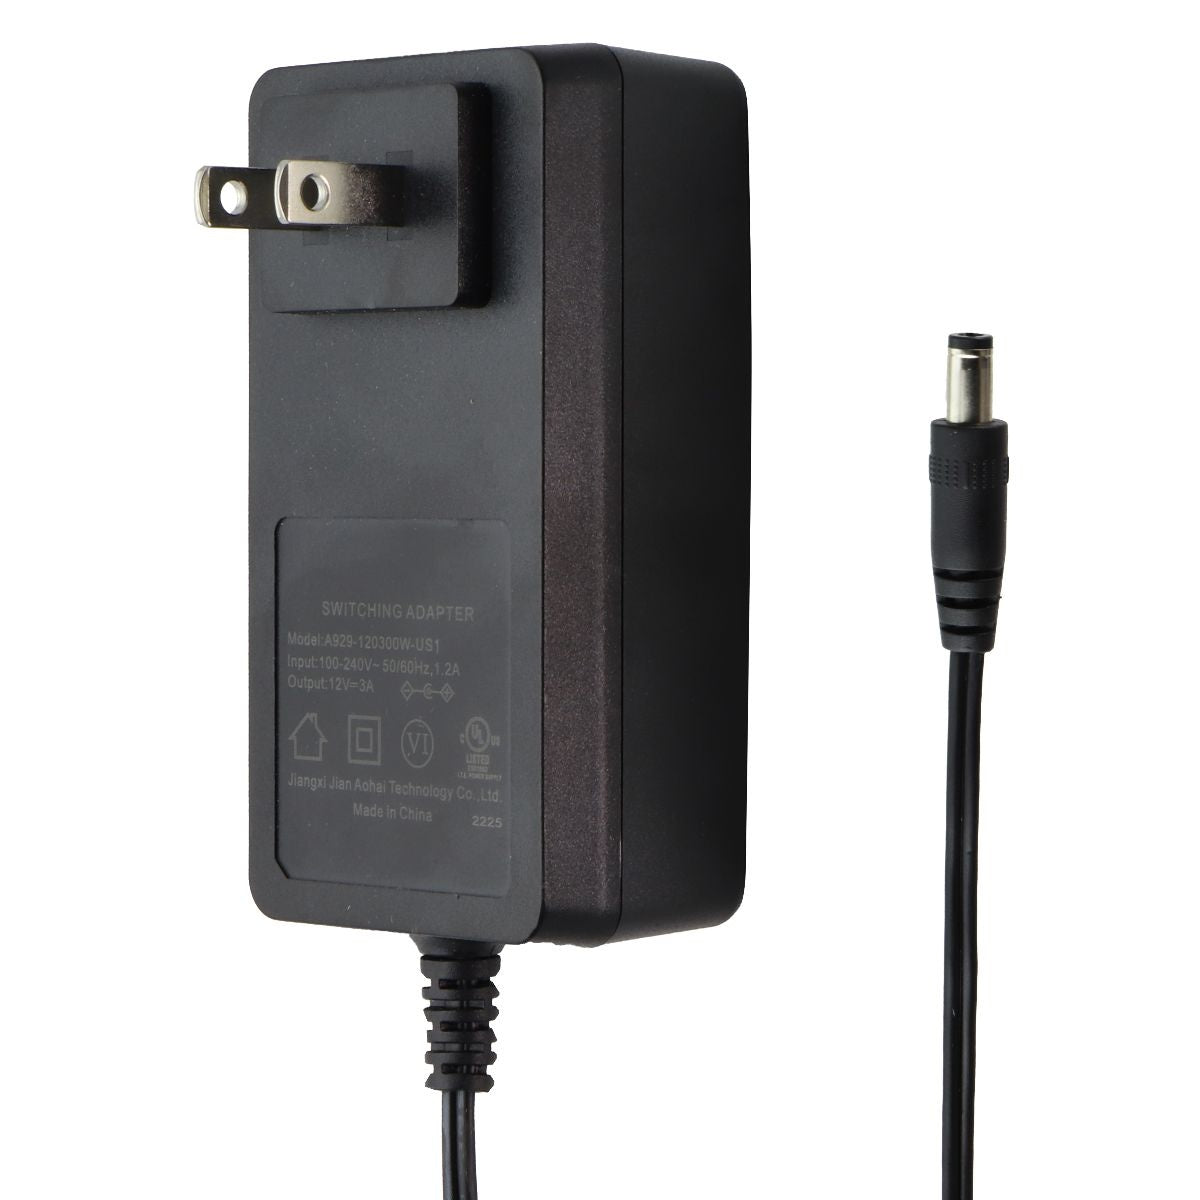 Switching 2-Prong AC Adapter with 6 Foot Cord - Black (A929-120300W-US1) Multipurpose Batteries & Power - Multipurpose AC to DC Adapters Unbranded    - Simple Cell Bulk Wholesale Pricing - USA Seller